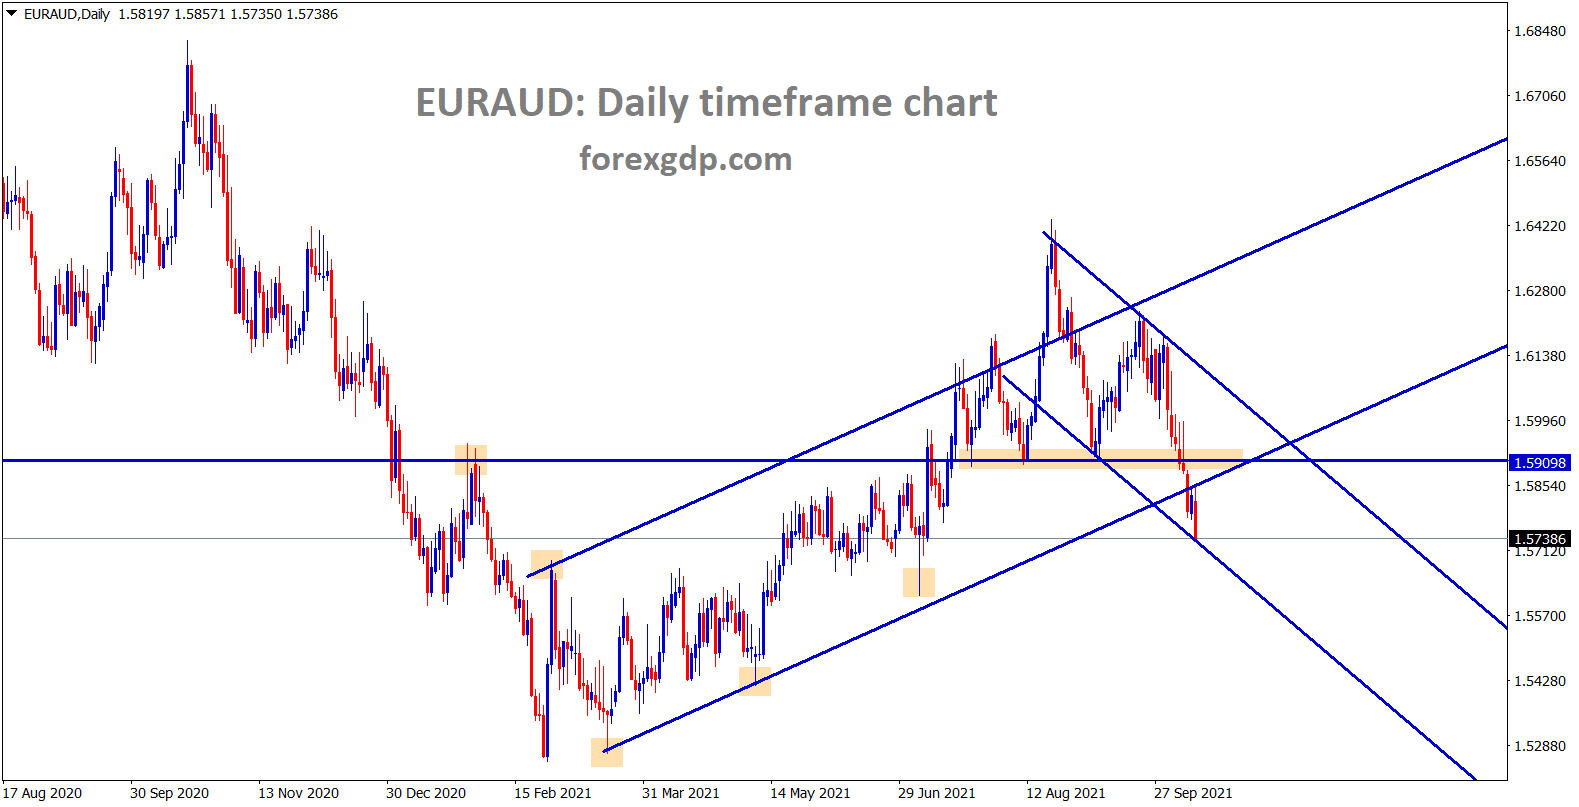 EURAUD has broken all the lows and reached the lower low level of minor descending channel